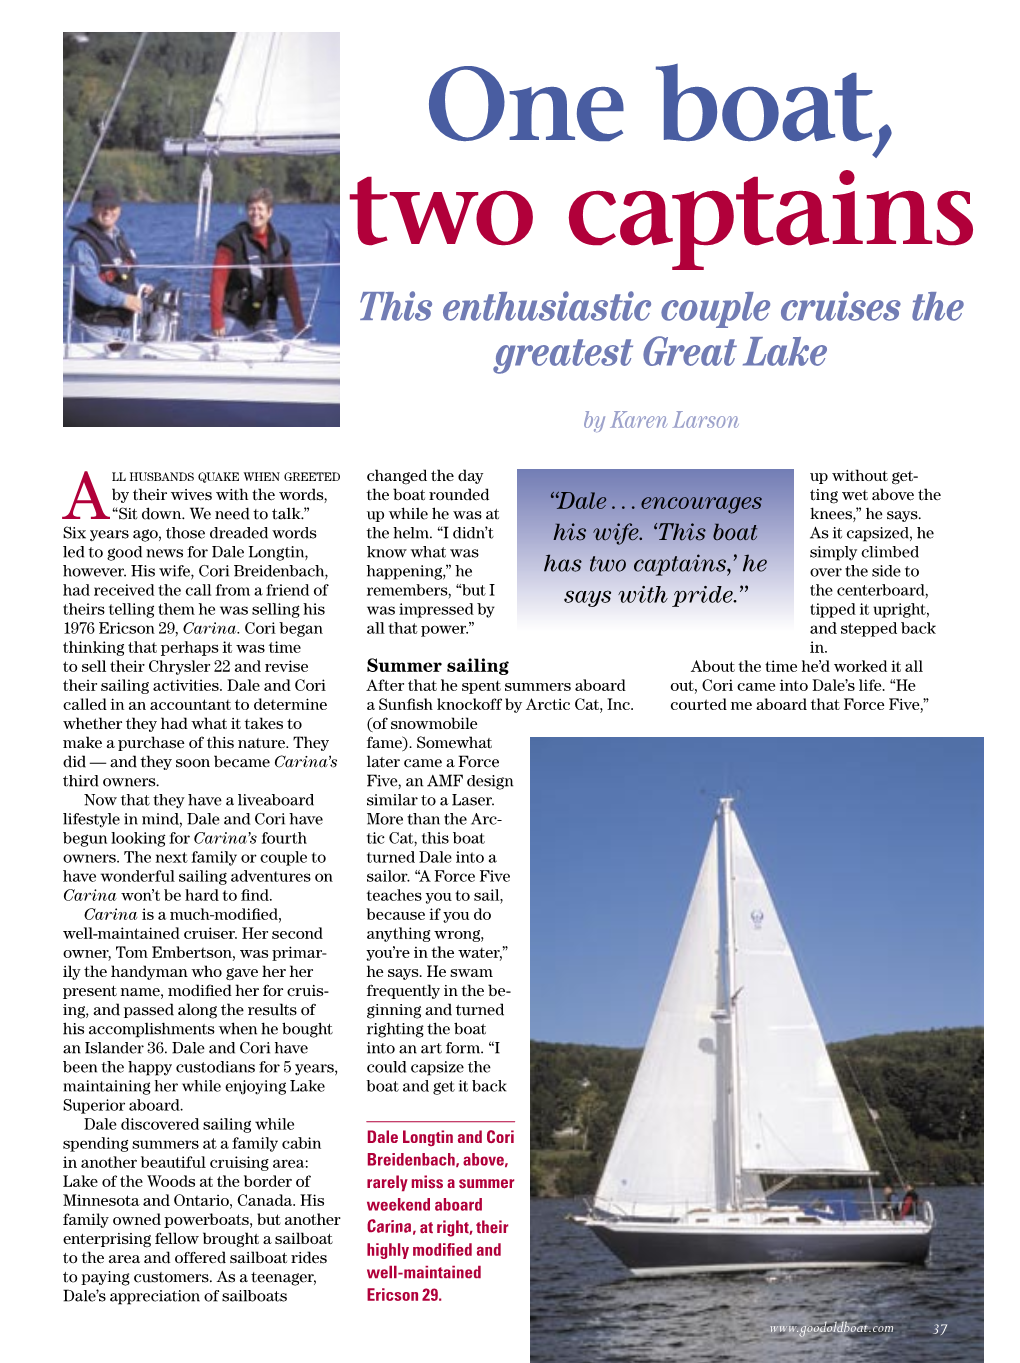 One Boat, Two Captains This Enthusiastic Couple Cruises the Greatest Great Lake